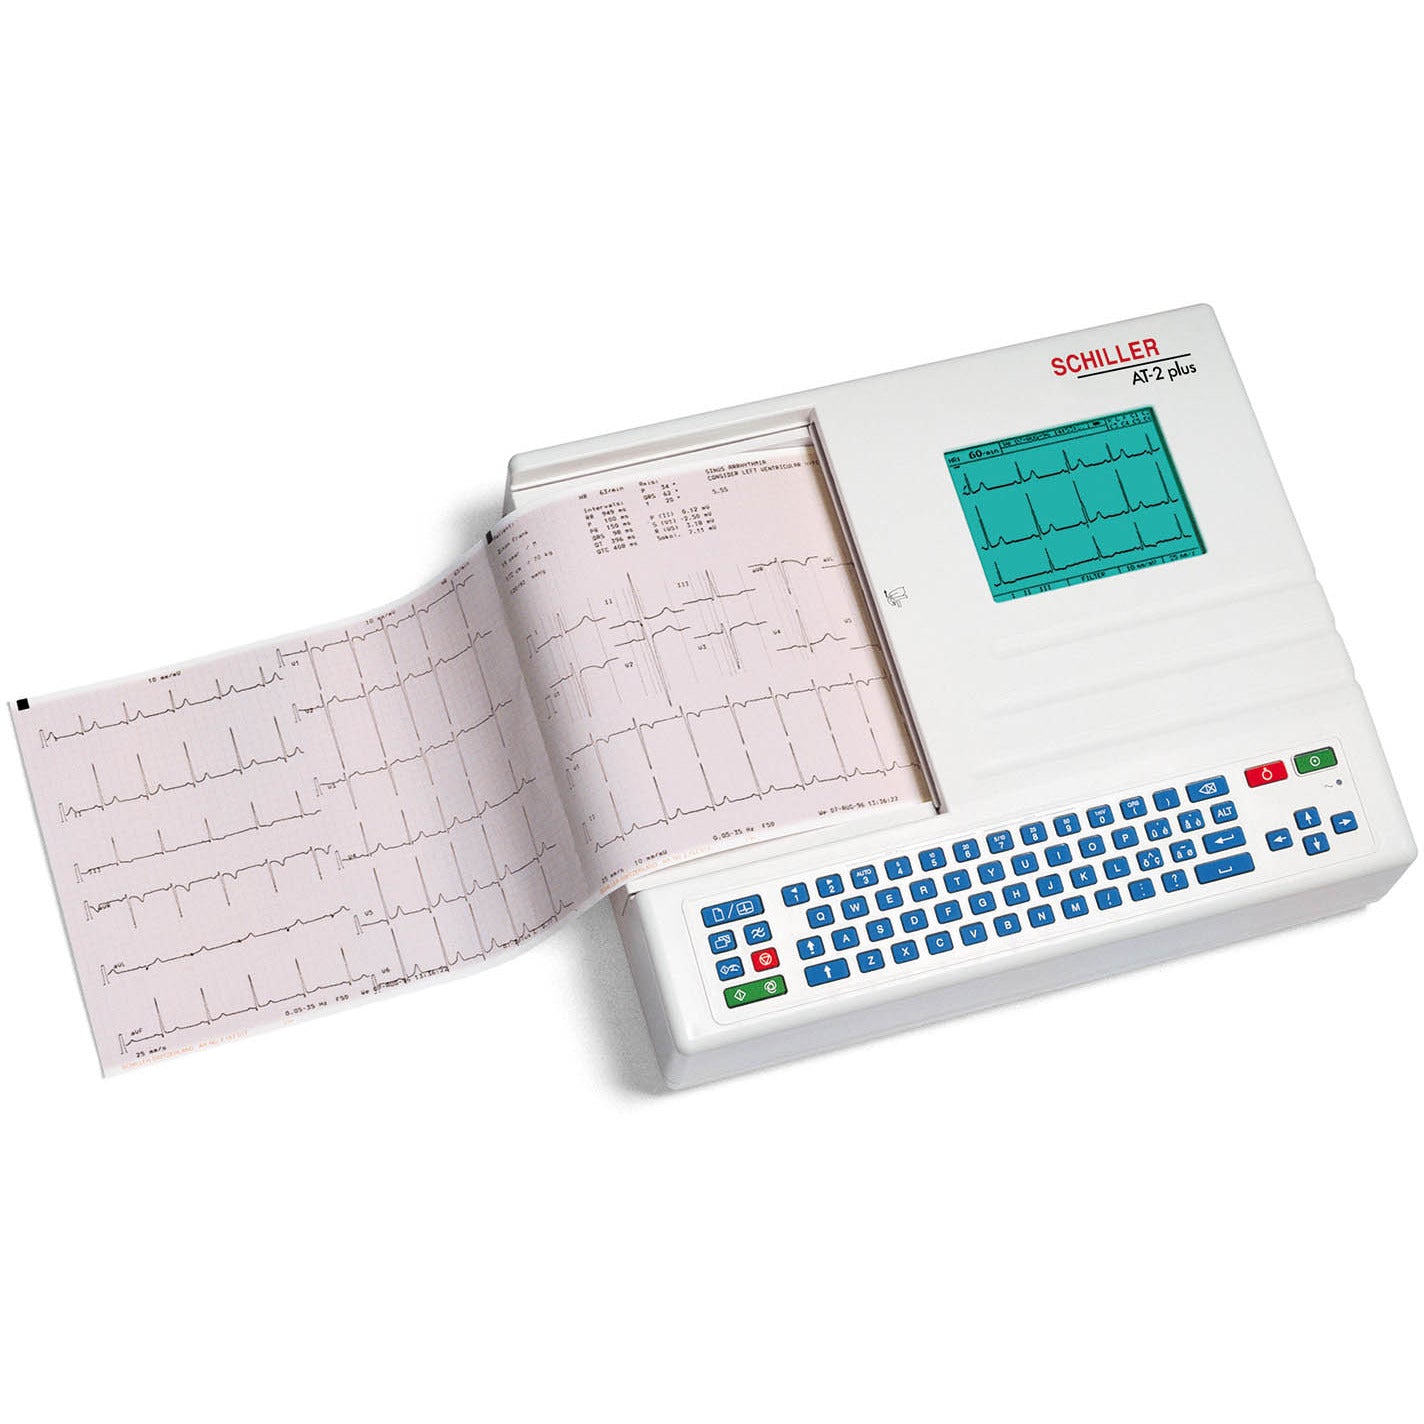 Cardiovit AT-2 Plus With Standard Accessories & C Software